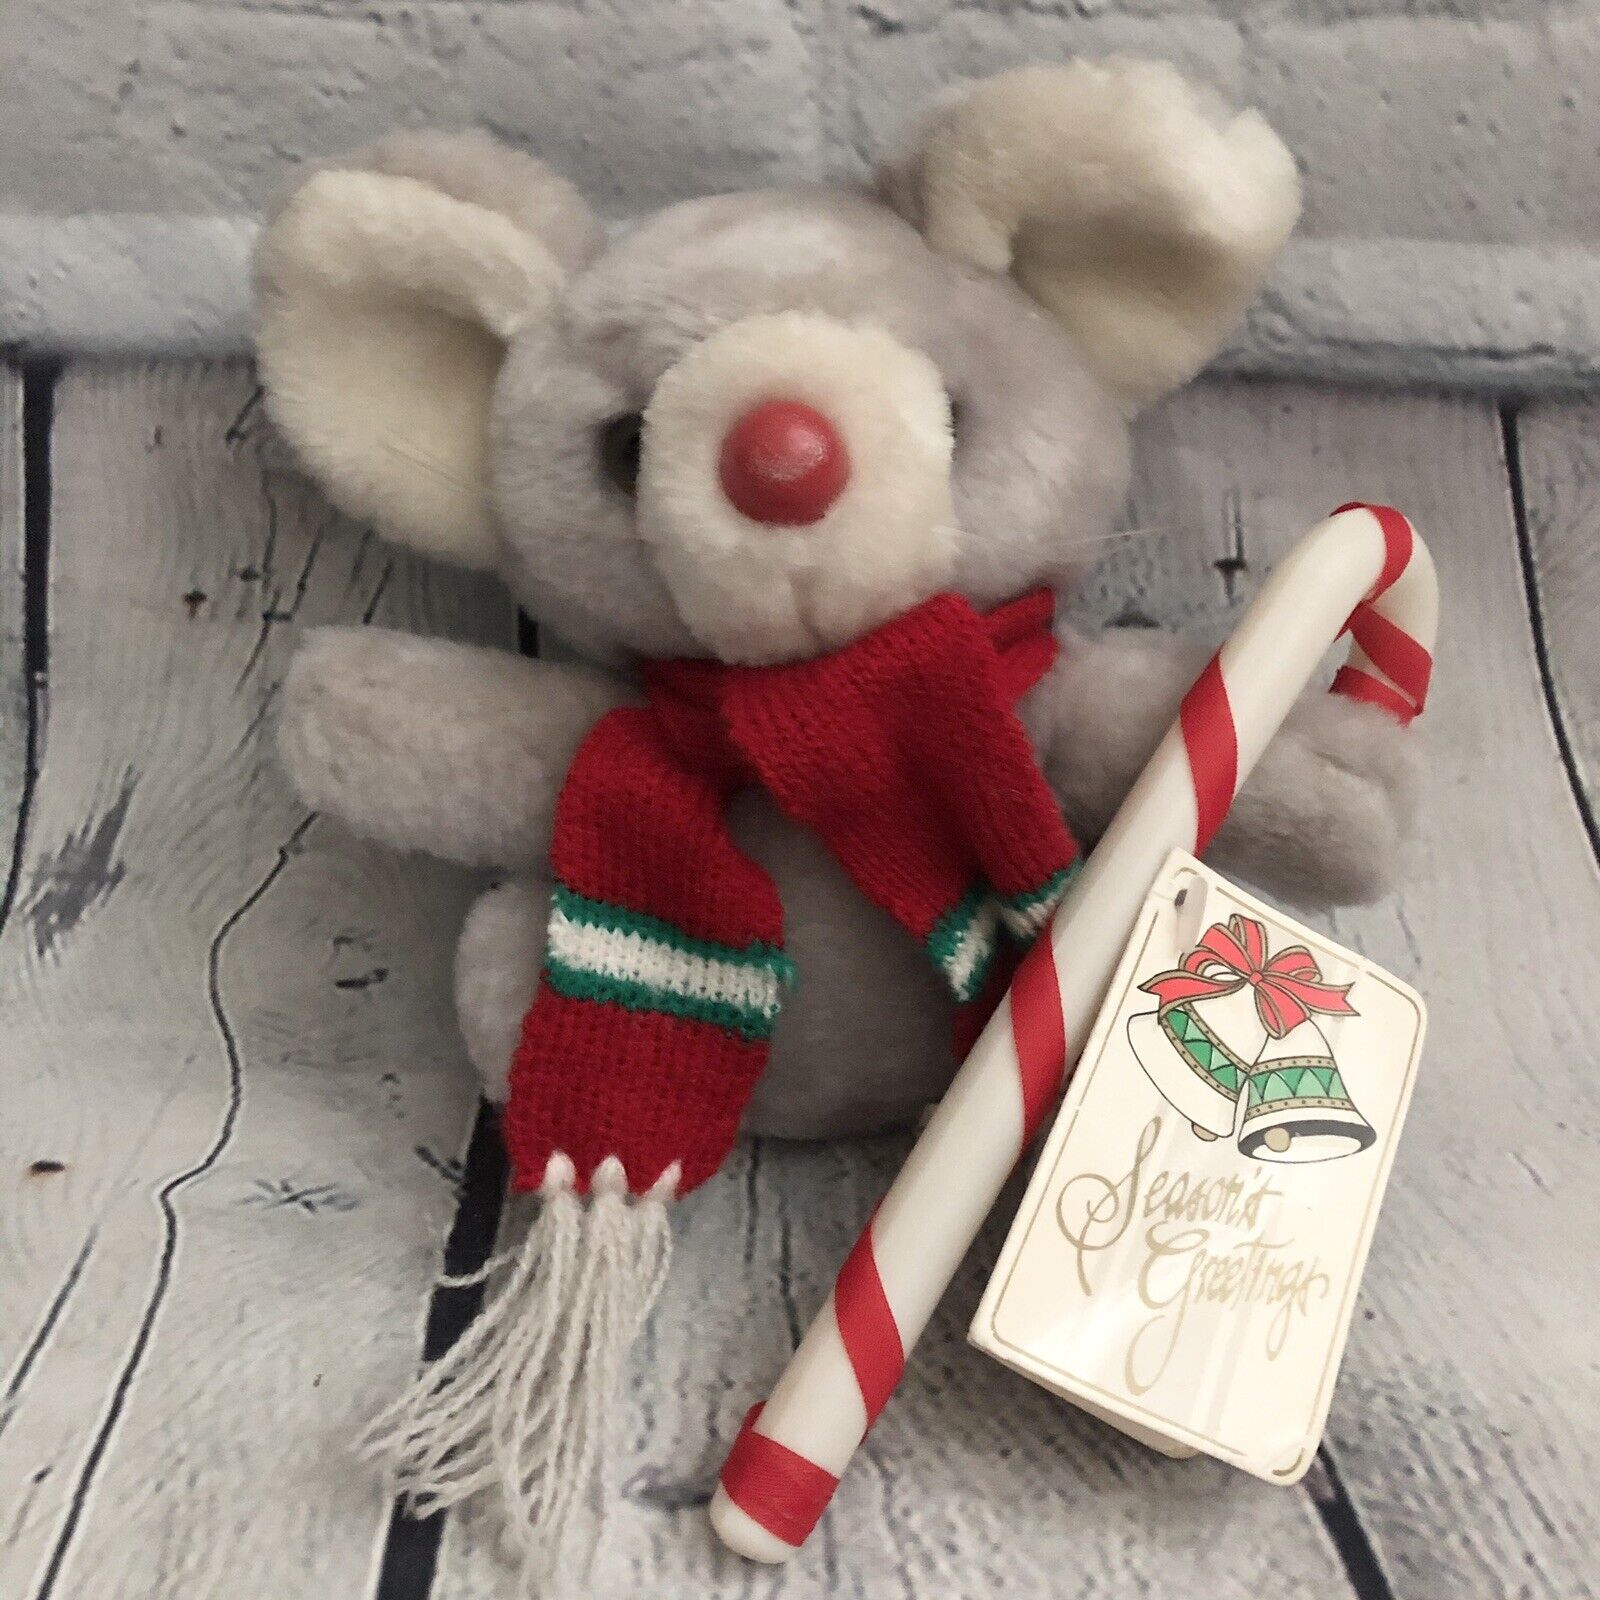 Vtg 1991/92 Holiday Mouse Stuffed Plush Joelson Industries Christmas Candy Cane